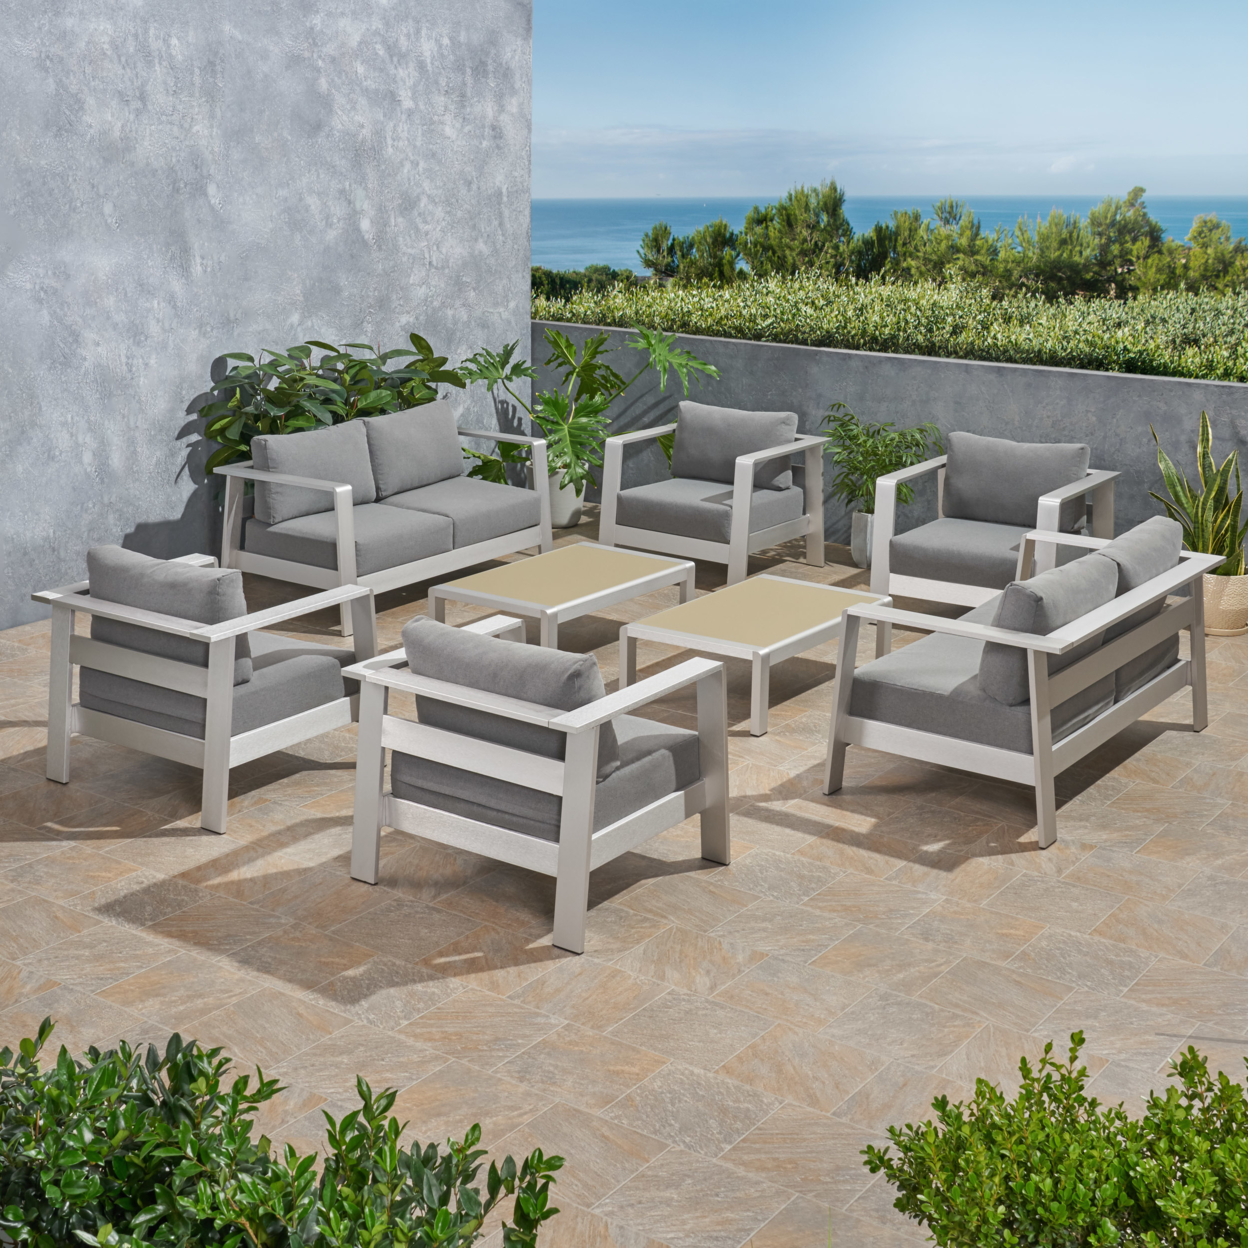 Qearl Outdoor 6 Seater Aluminum Club Chair Set With Coffee Table And Loveseat - Silver + Gray